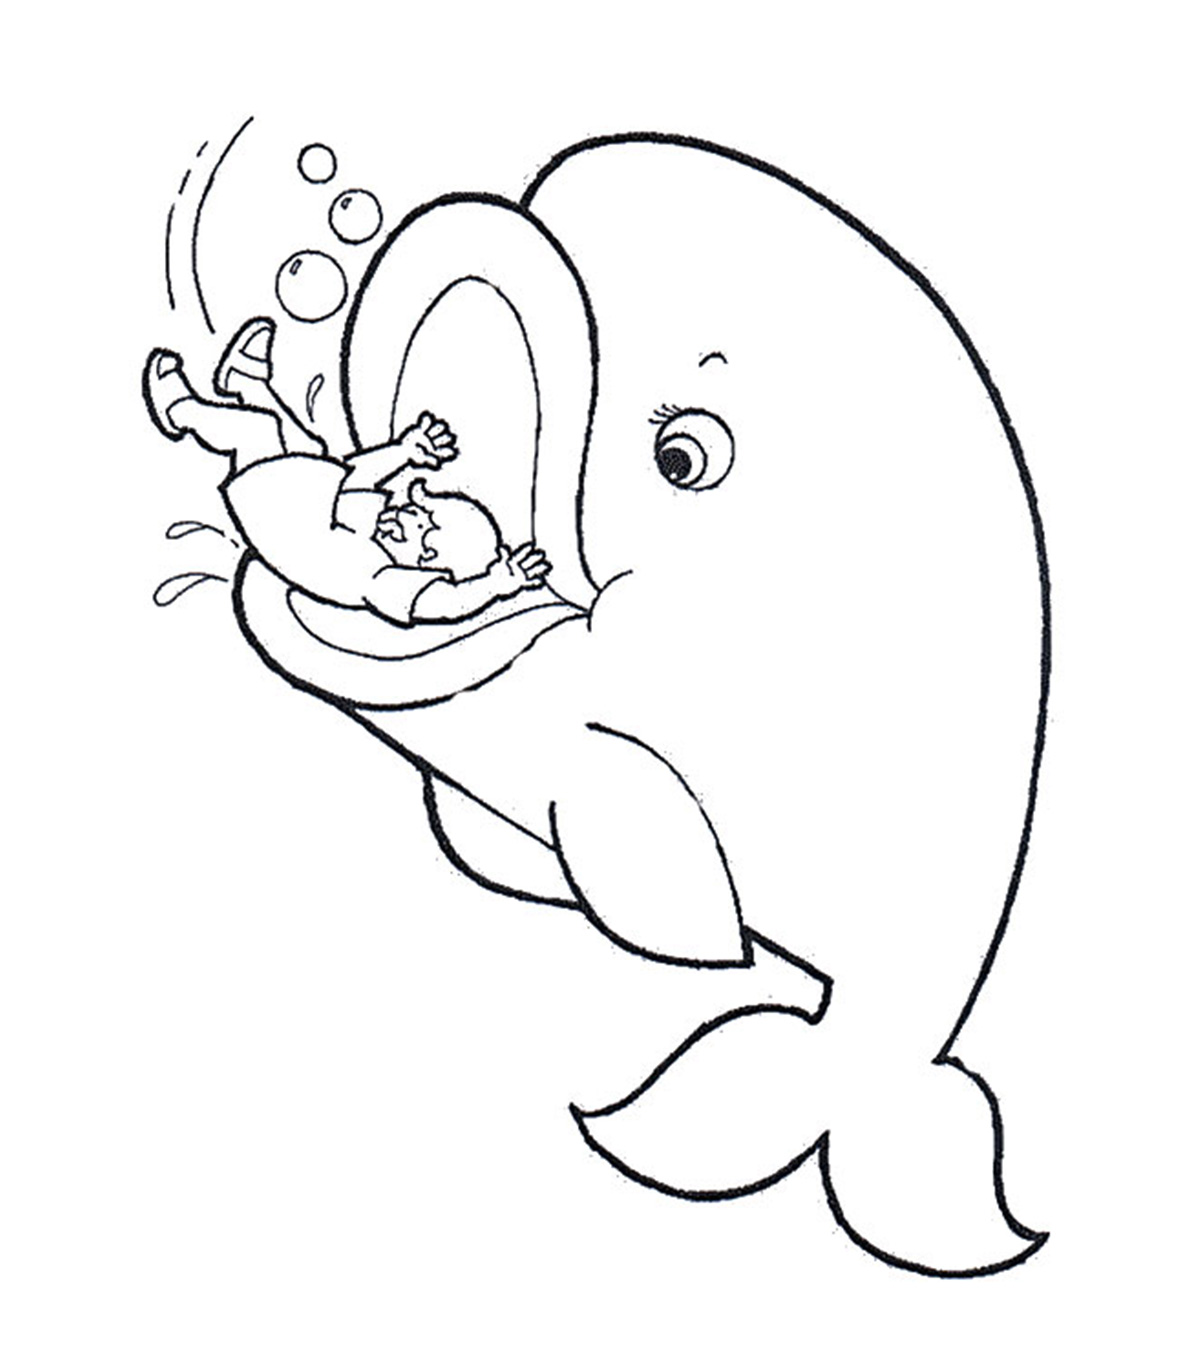 10 Best Jonah And The Whale Coloring Pages For Your Little Ones